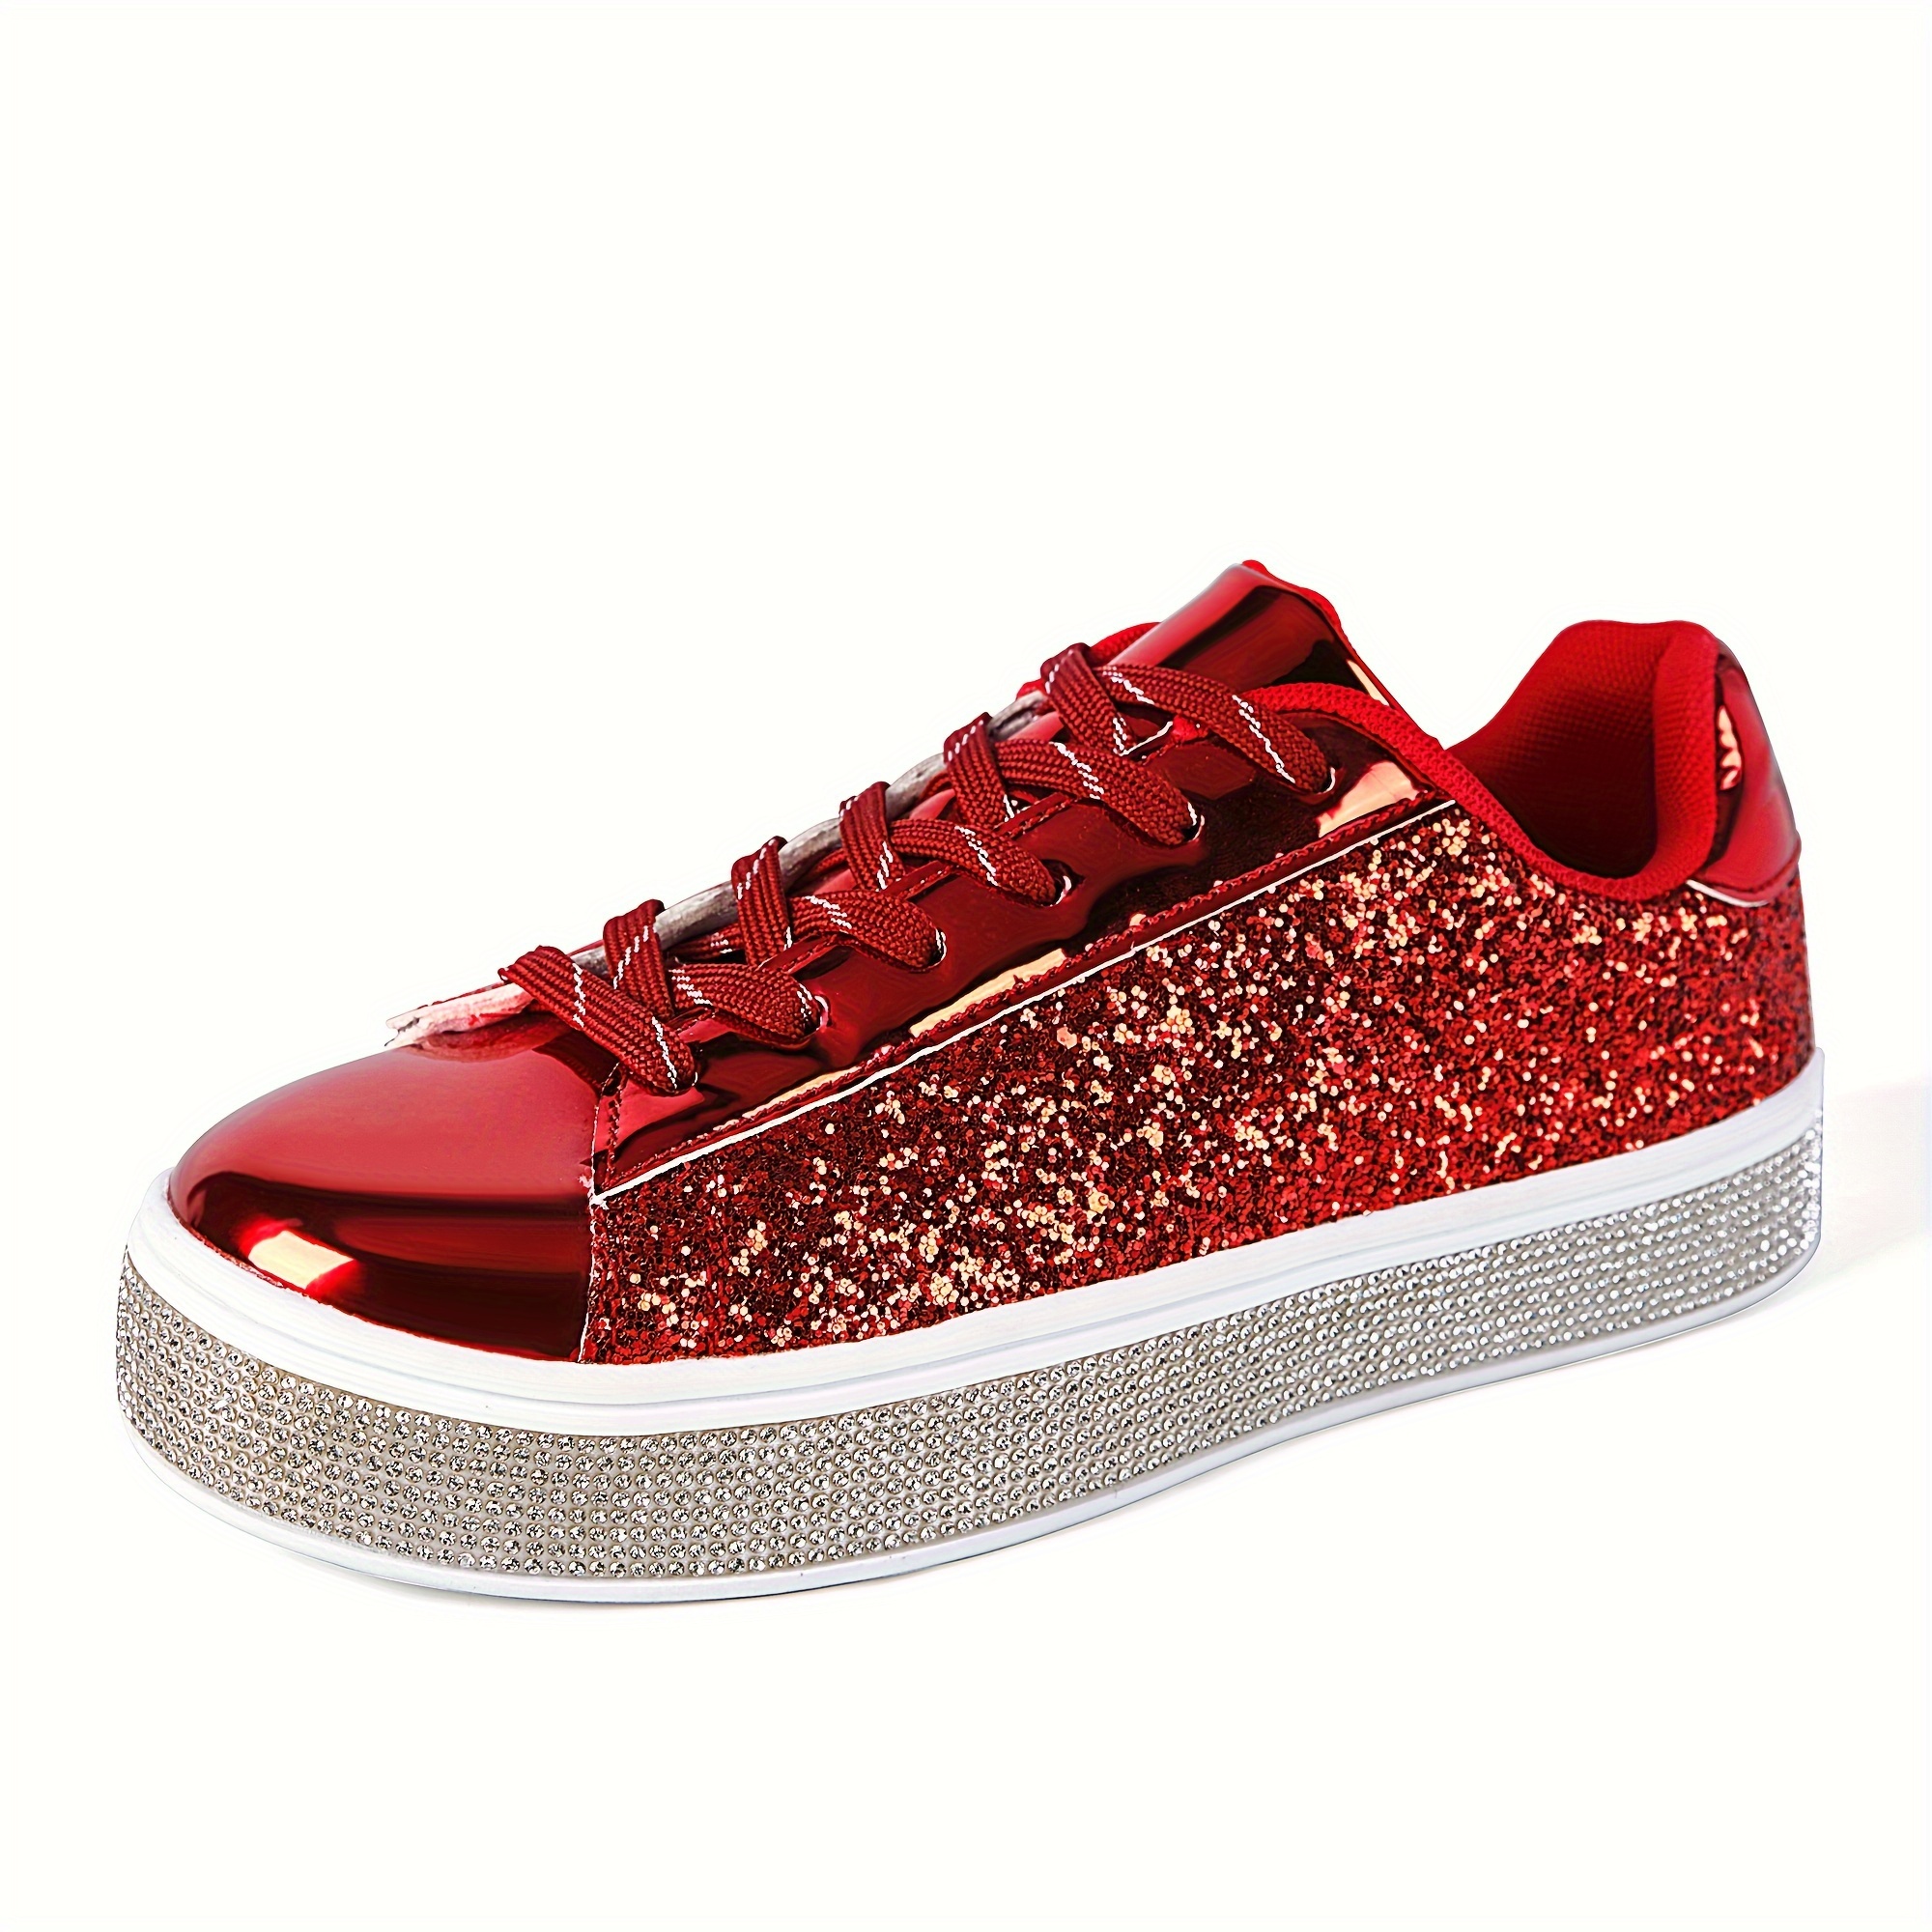 oiky UUBARIS Women‘s Glitter Tennis Sneakers Sparkling Lace Up Low Top ...